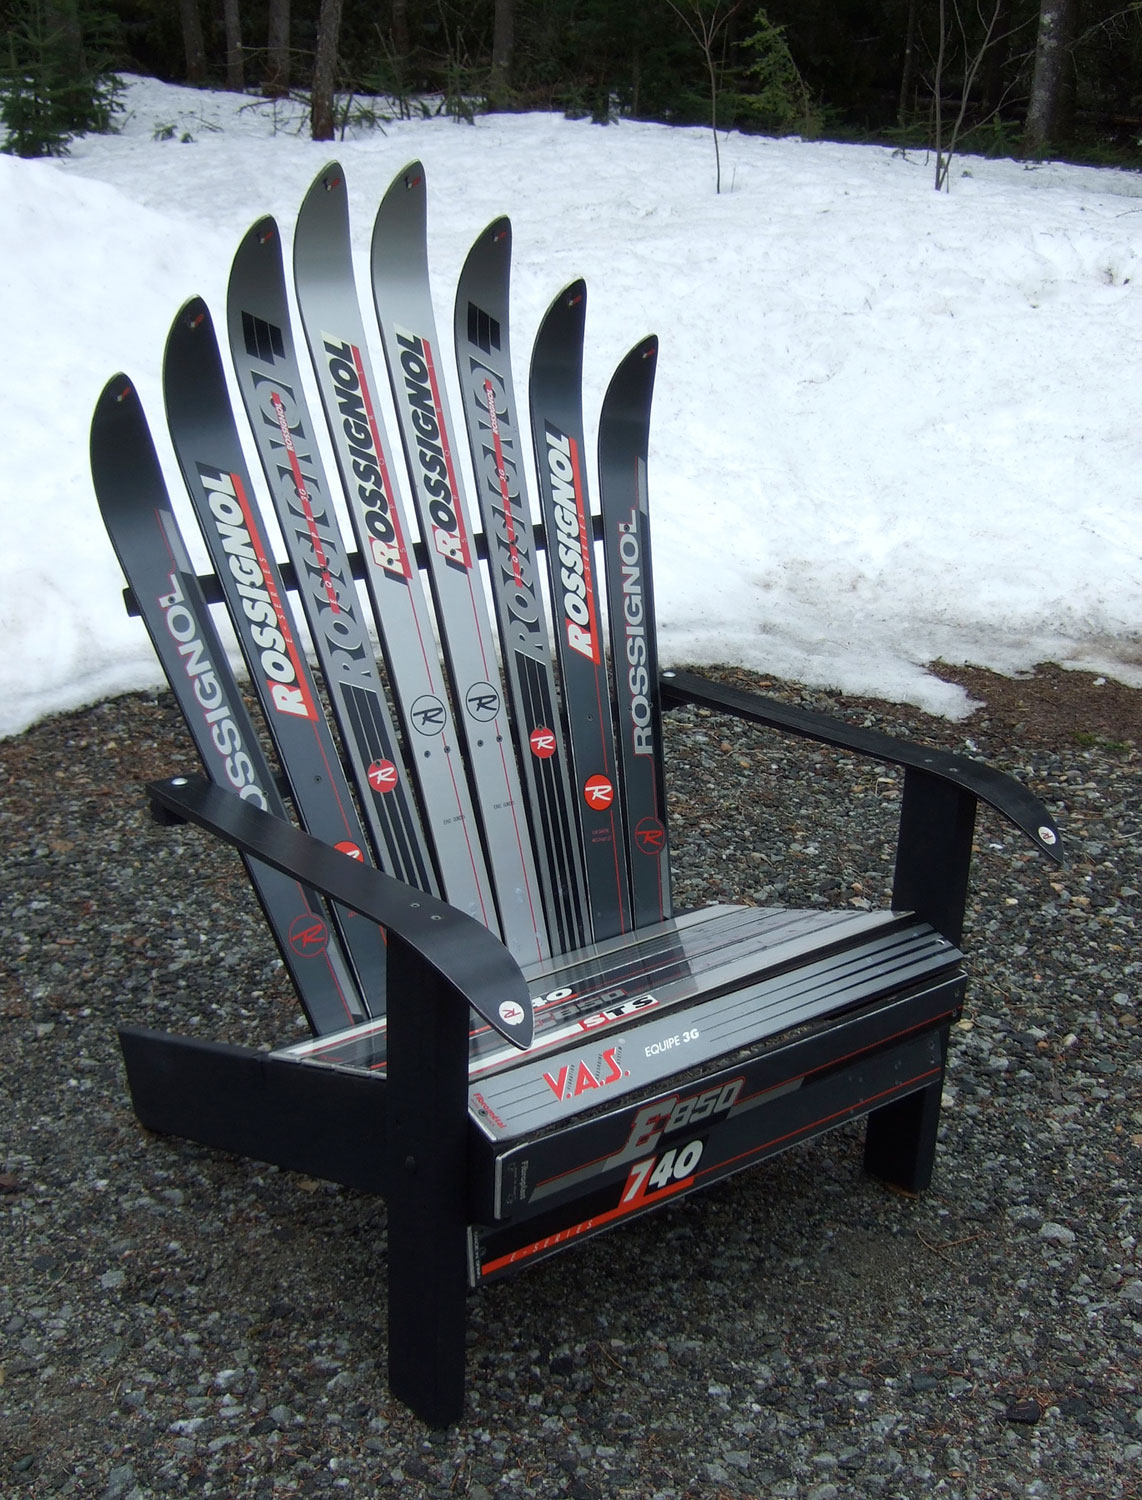 Woodworking Plans Build Adirondack Chair With Skis PDF Plans